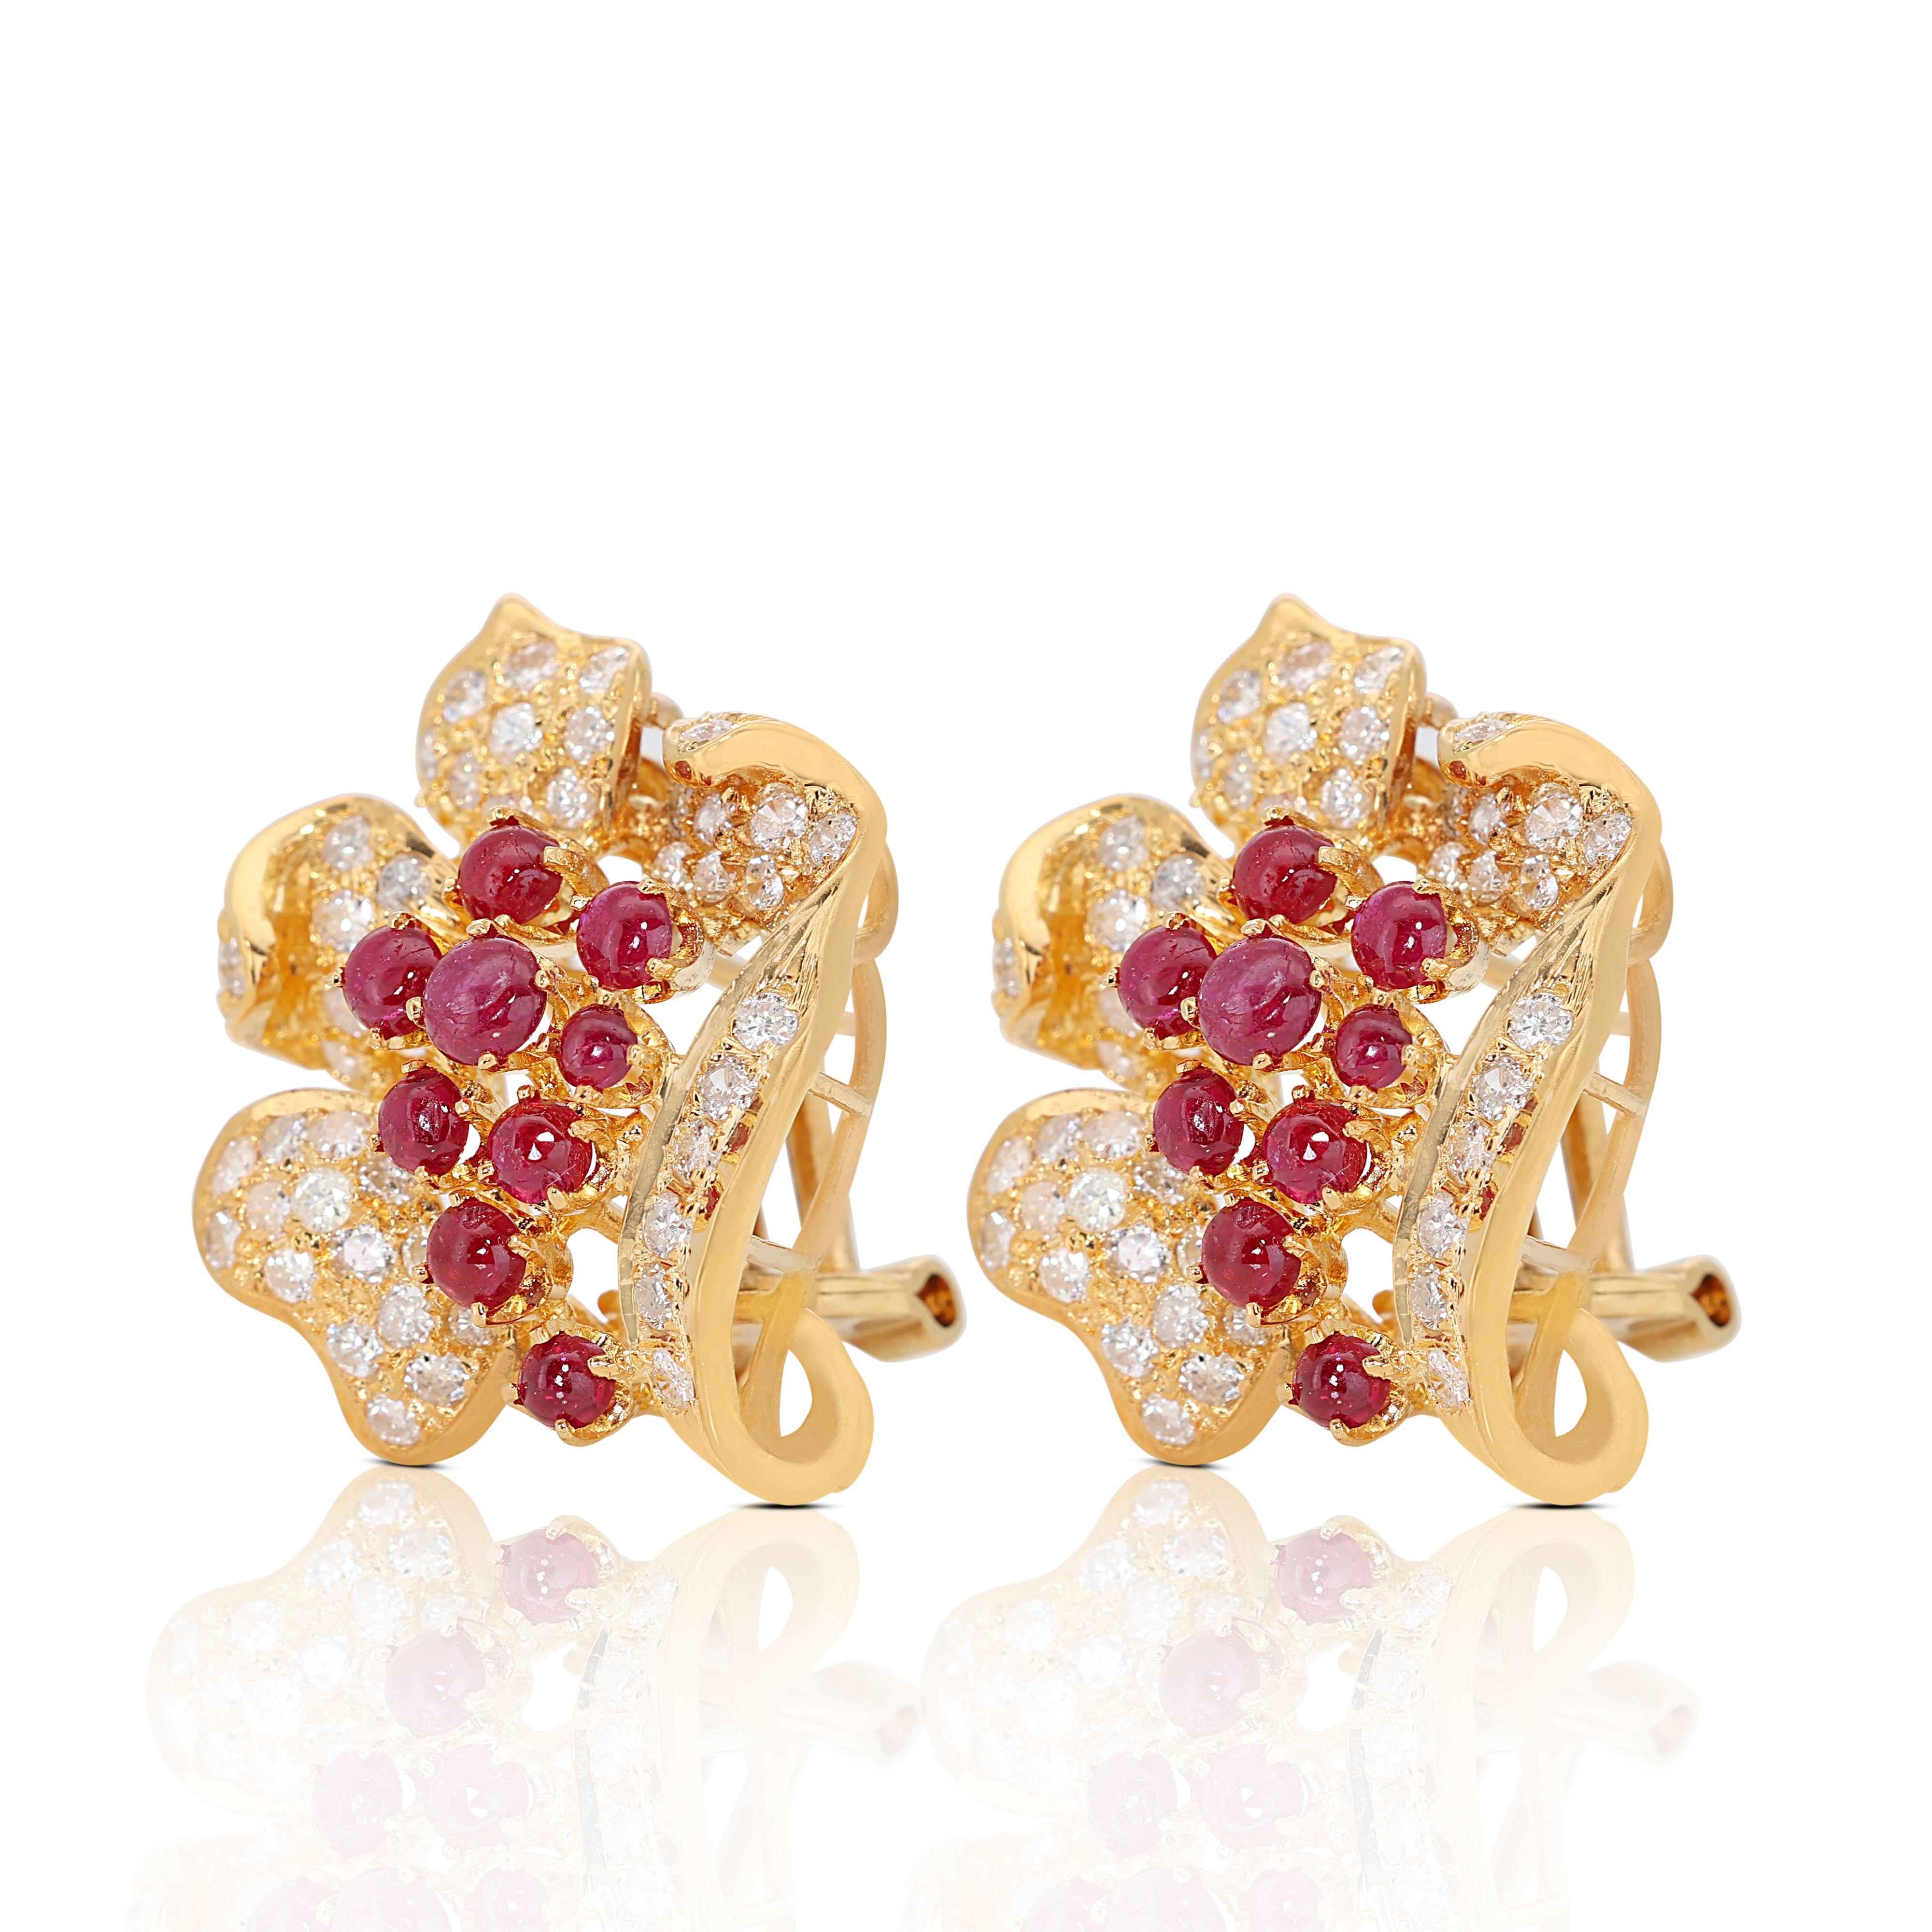 Captivating 0.90ct Ruby Earrings set in 18K Yellow Gold In New Condition For Sale In רמת גן, IL